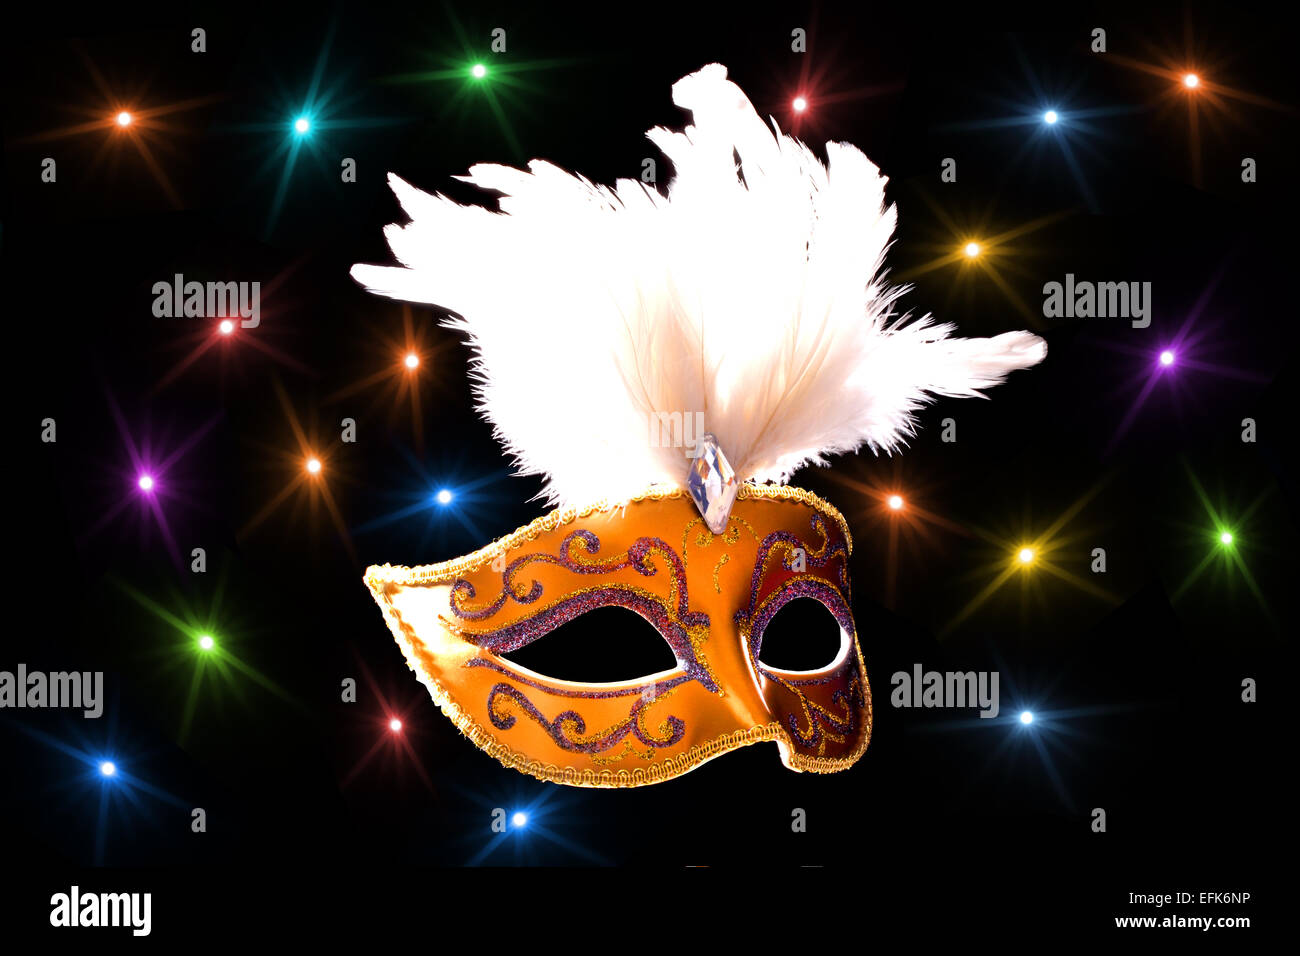 A Harlequin mask with colored lights in the background Stock Photo